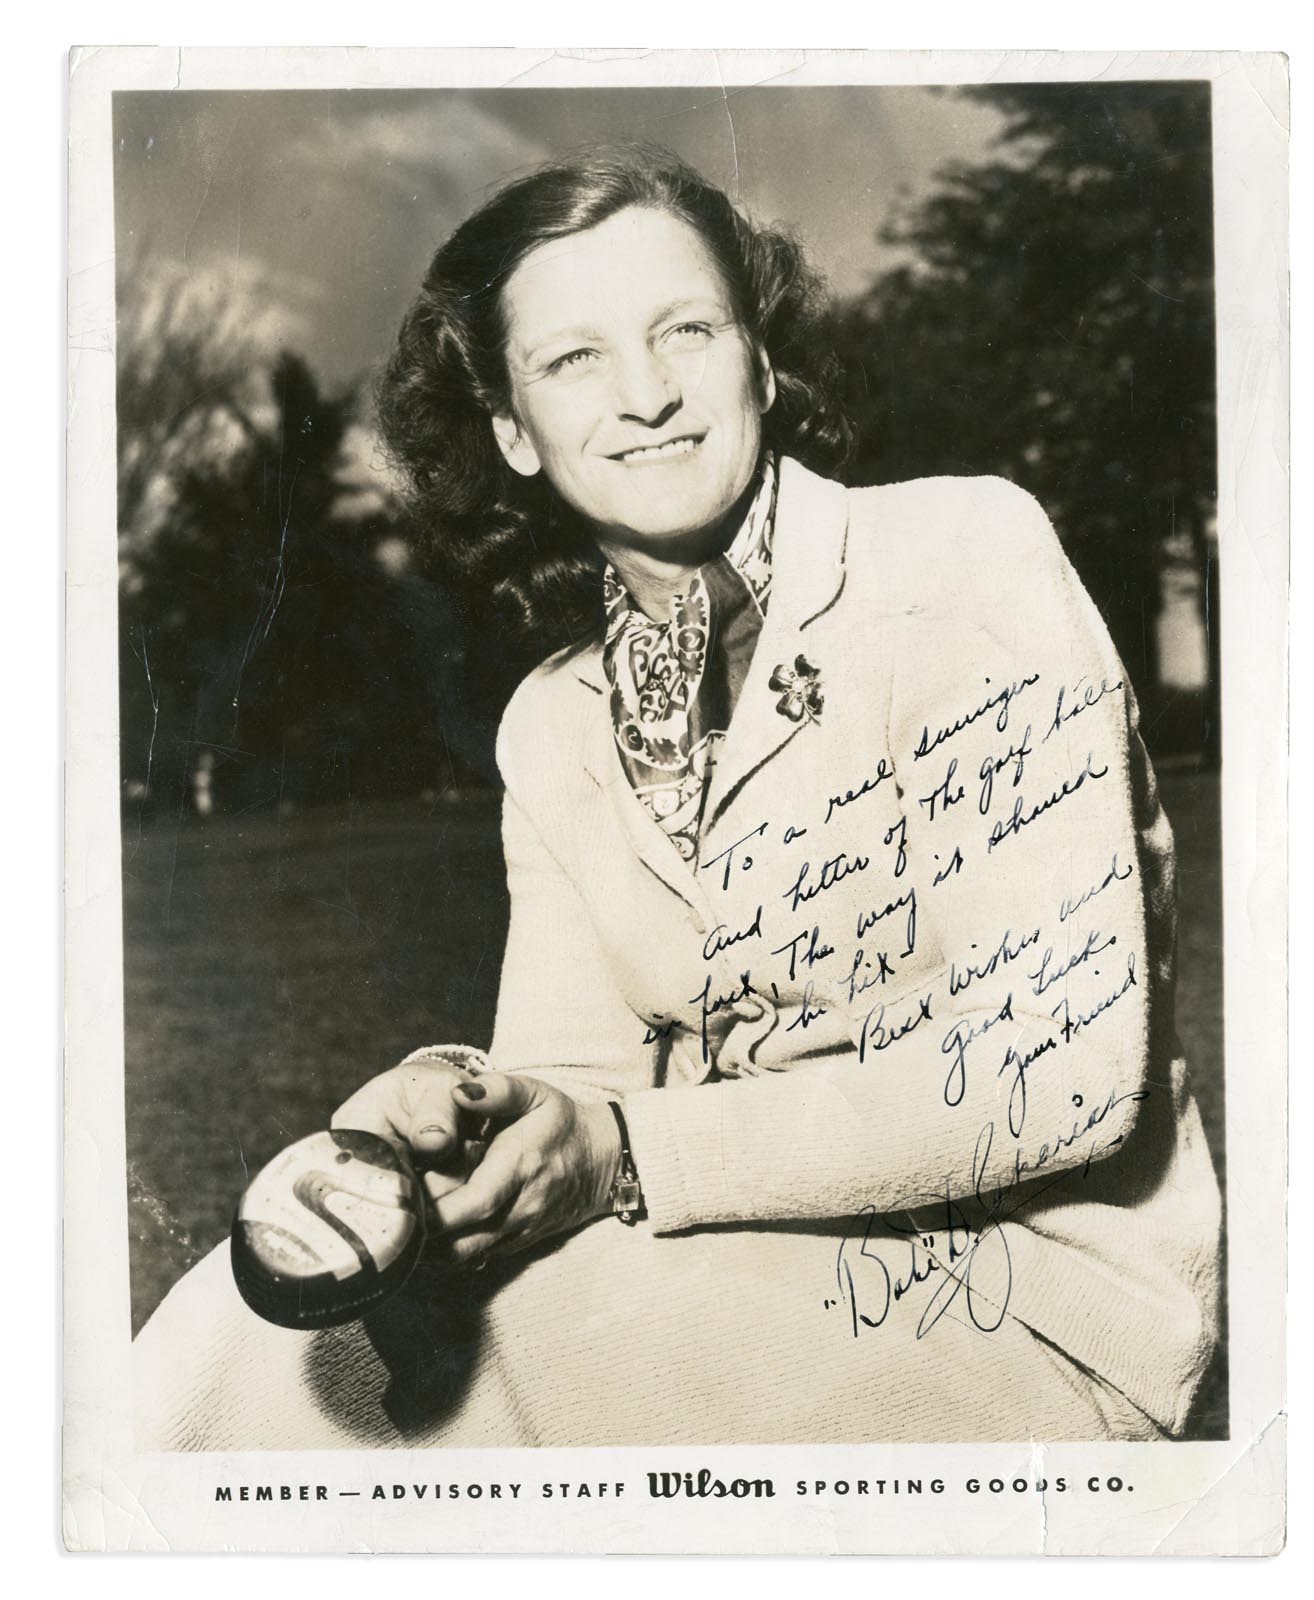 Olympics and All Sports - Babe Didrikson Signed Inscribed Photograph "To a Real Swinger" (PSA)